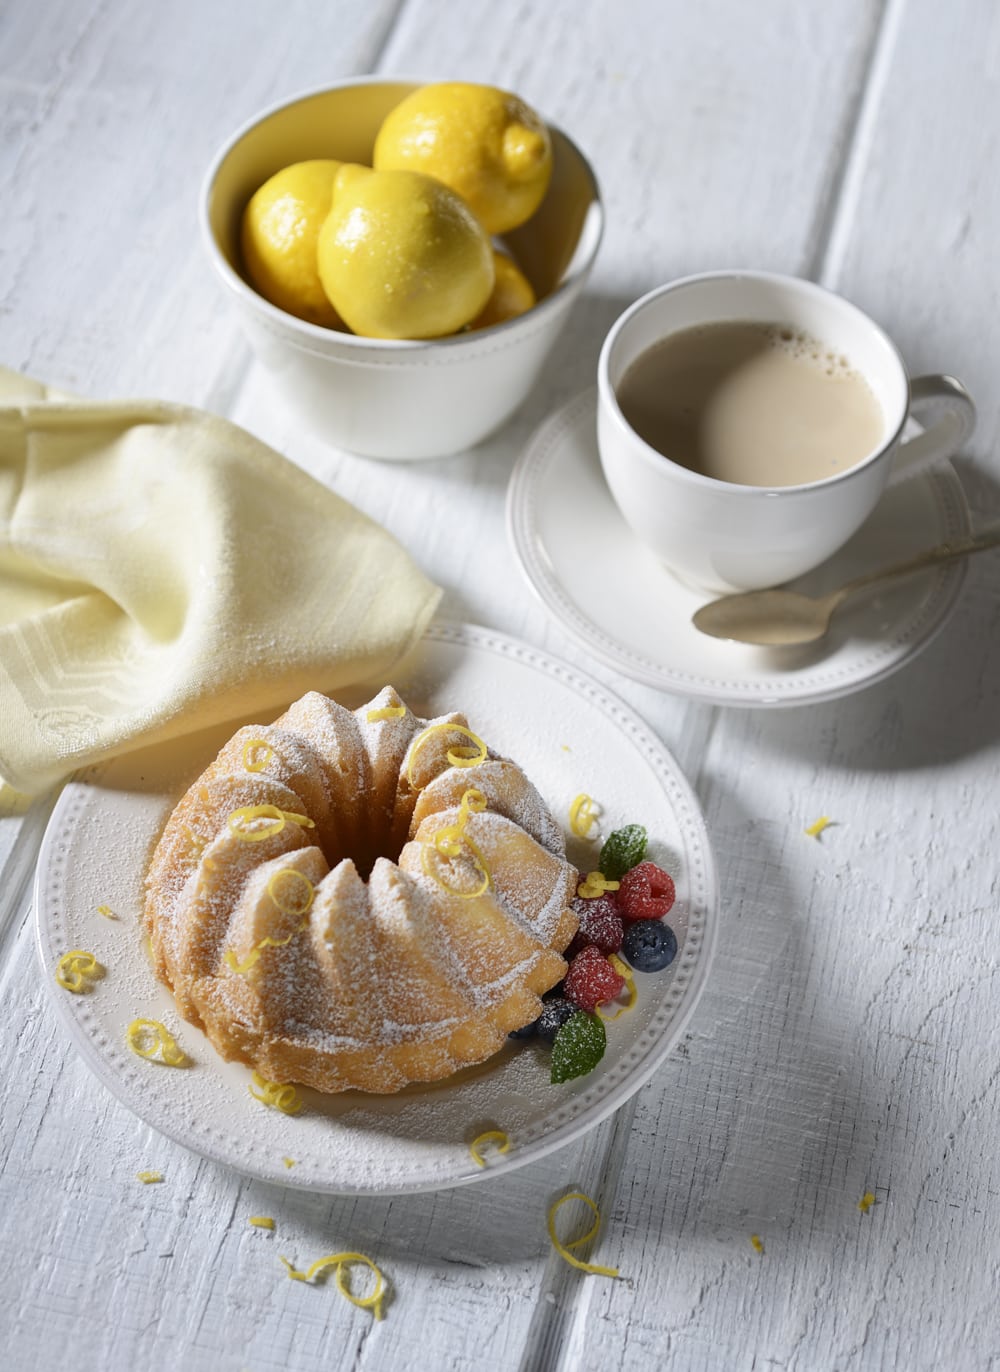 Food scene featuring a bundt cake with lemon skin shavings sprinkled on it with fruit on white plate and cup of lightened coffee and bowl of lemons all on white rustic background Product Photography